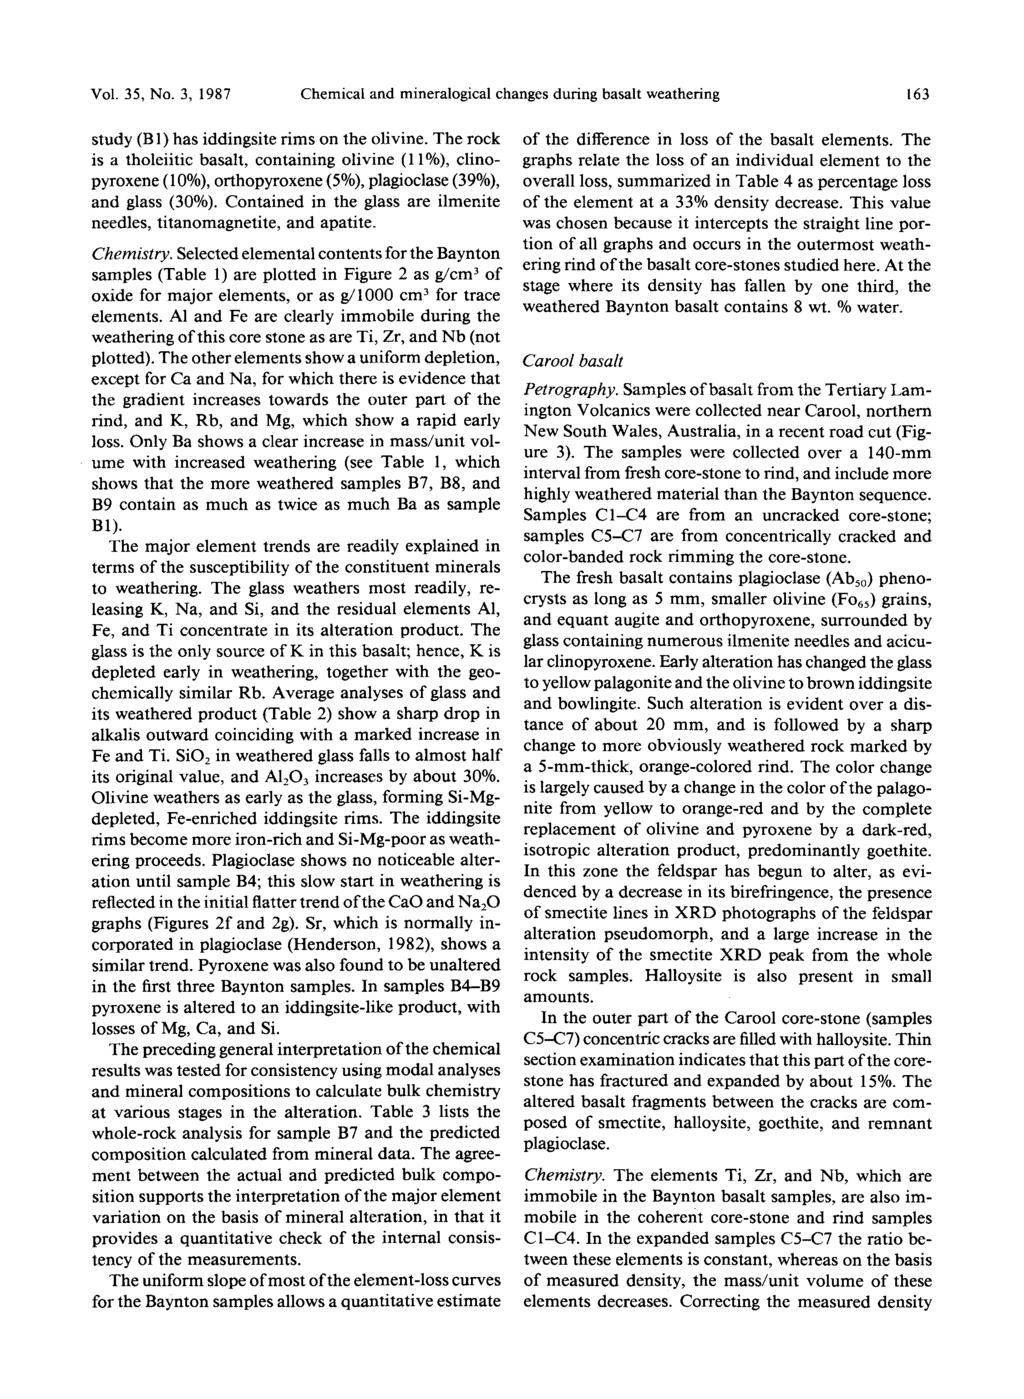 Vol. 35, No. 3, 1987 Chemical and mineralogical changes during basalt weathering 163 study (B 1) has iddingsite rims on the olivine.